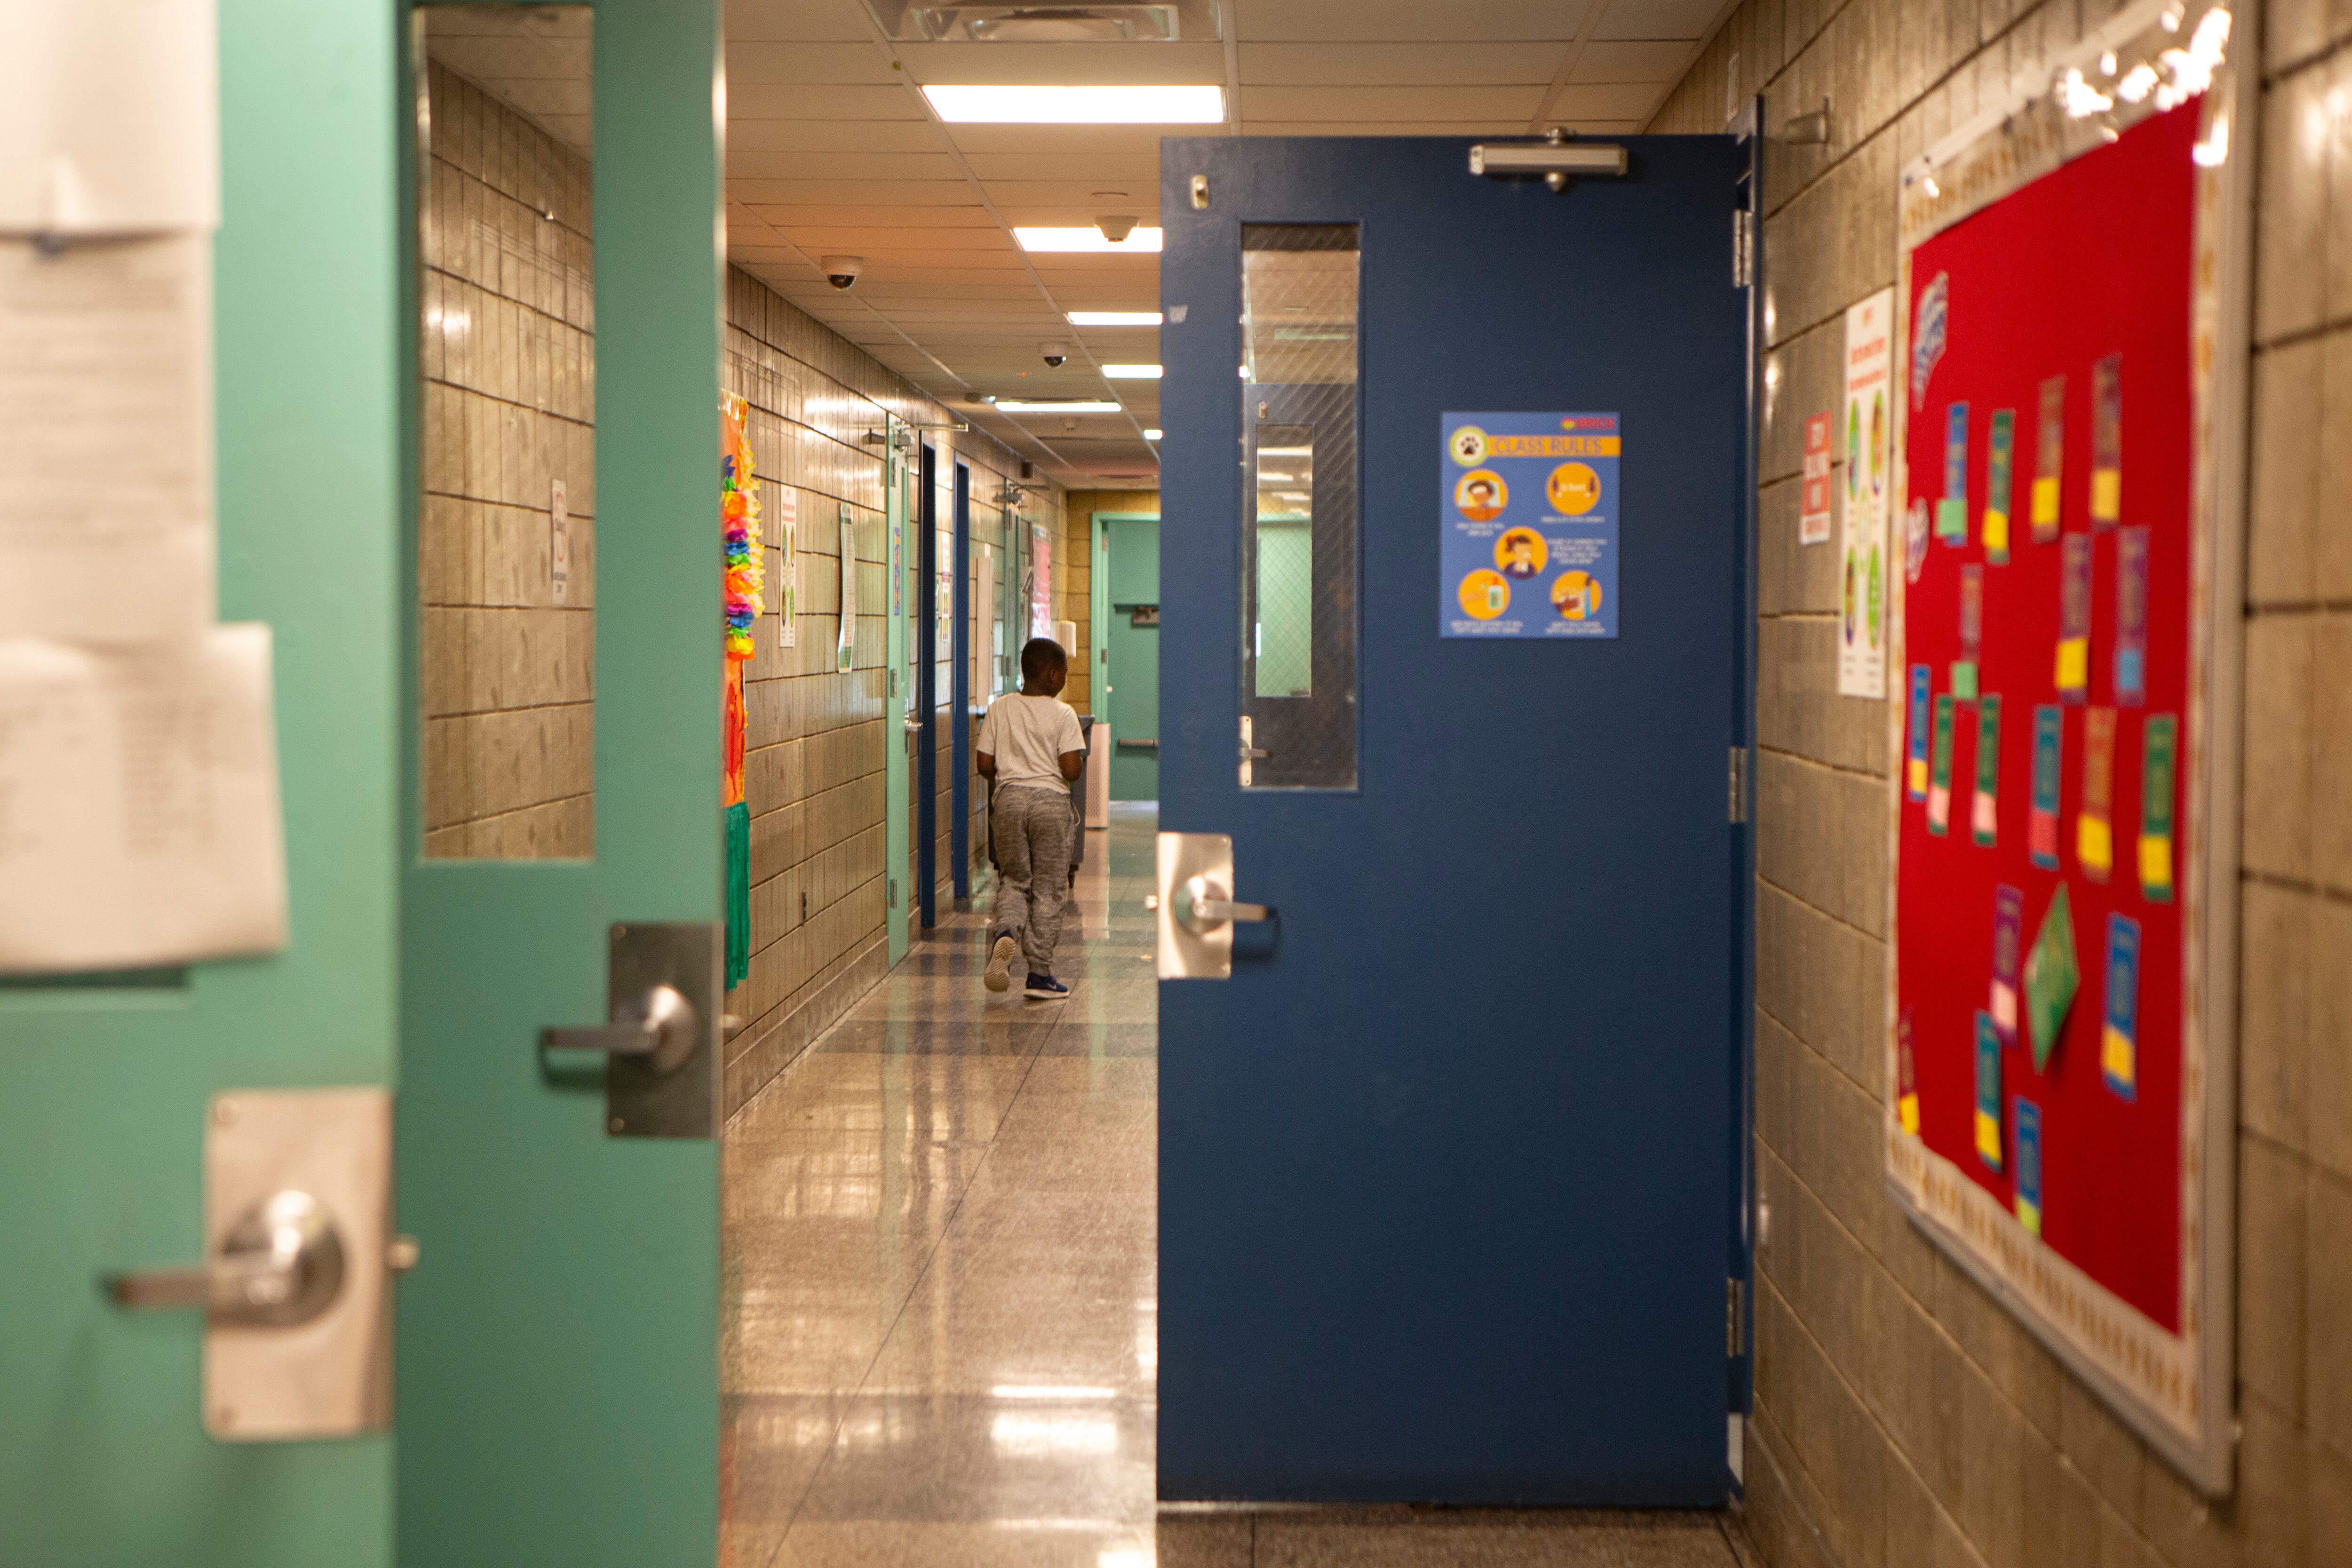 A blue classroom door and two green doors are open in the middle of a school hallway.